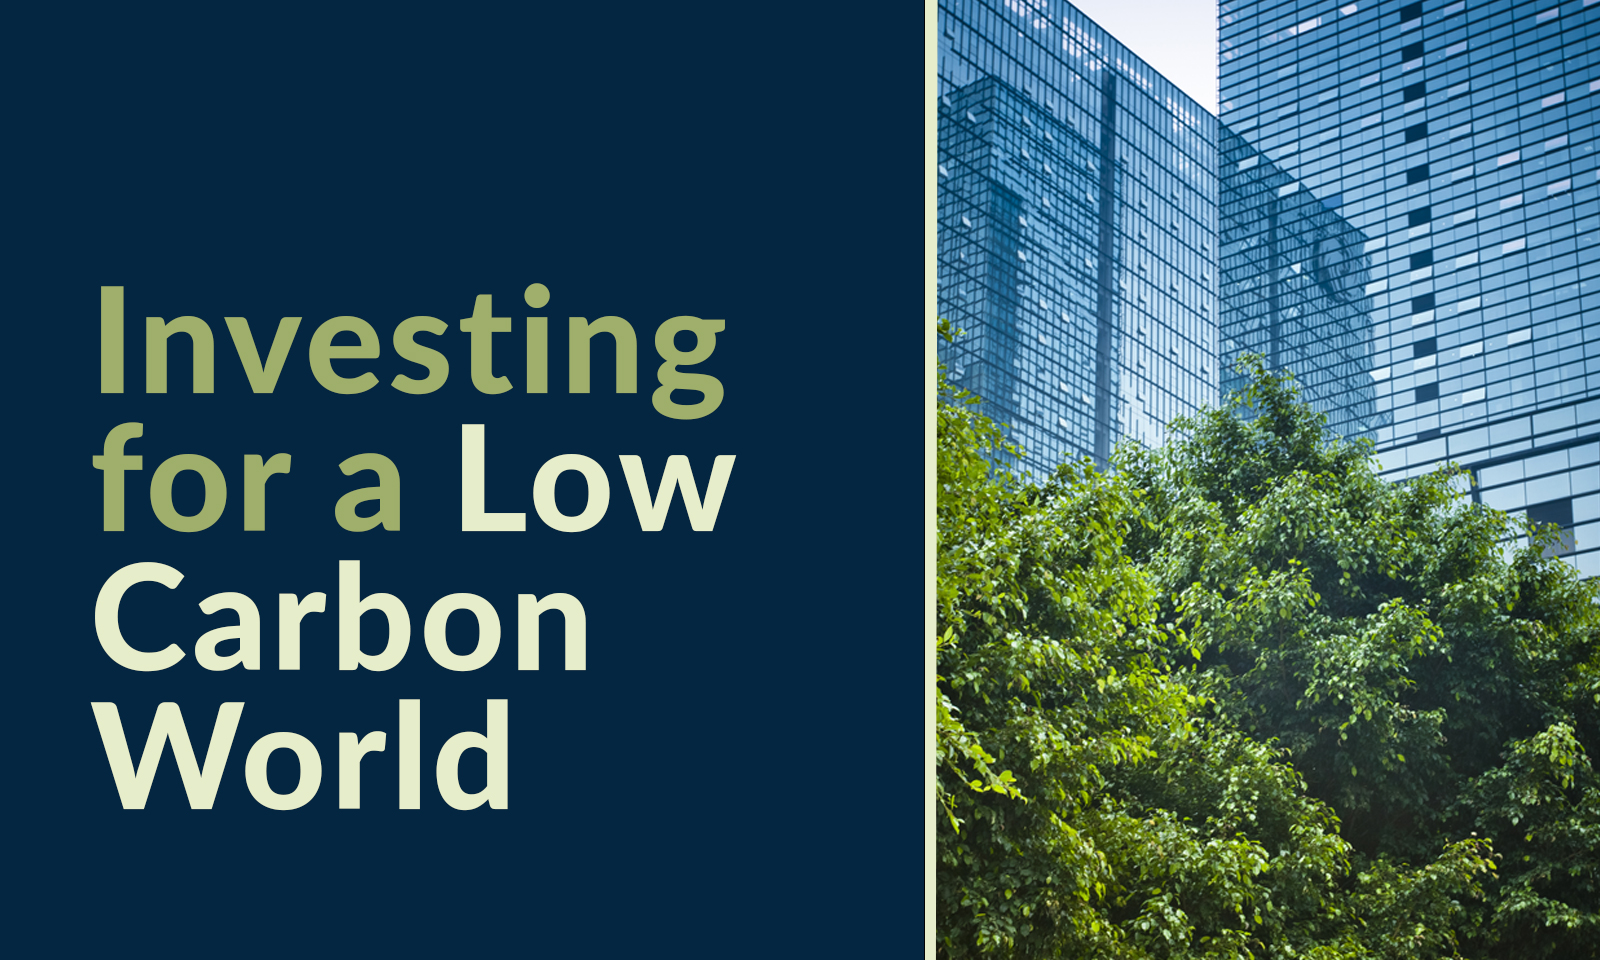 Investing for a Low Carbon World